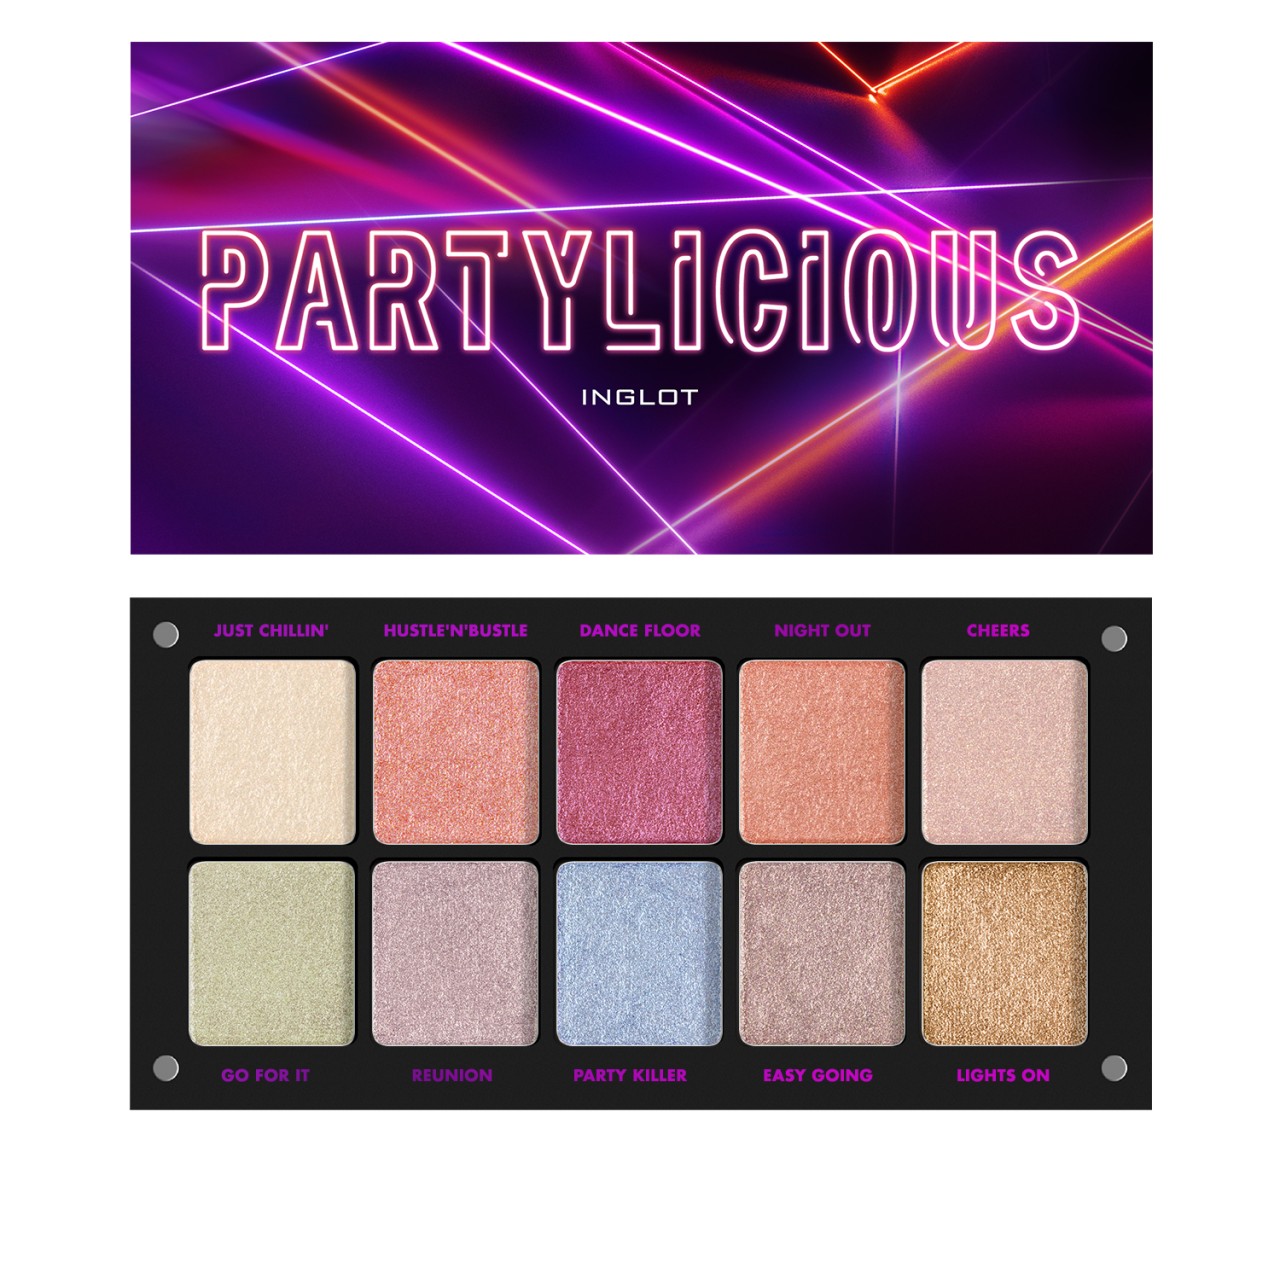 INGLOT Partylicious Palette